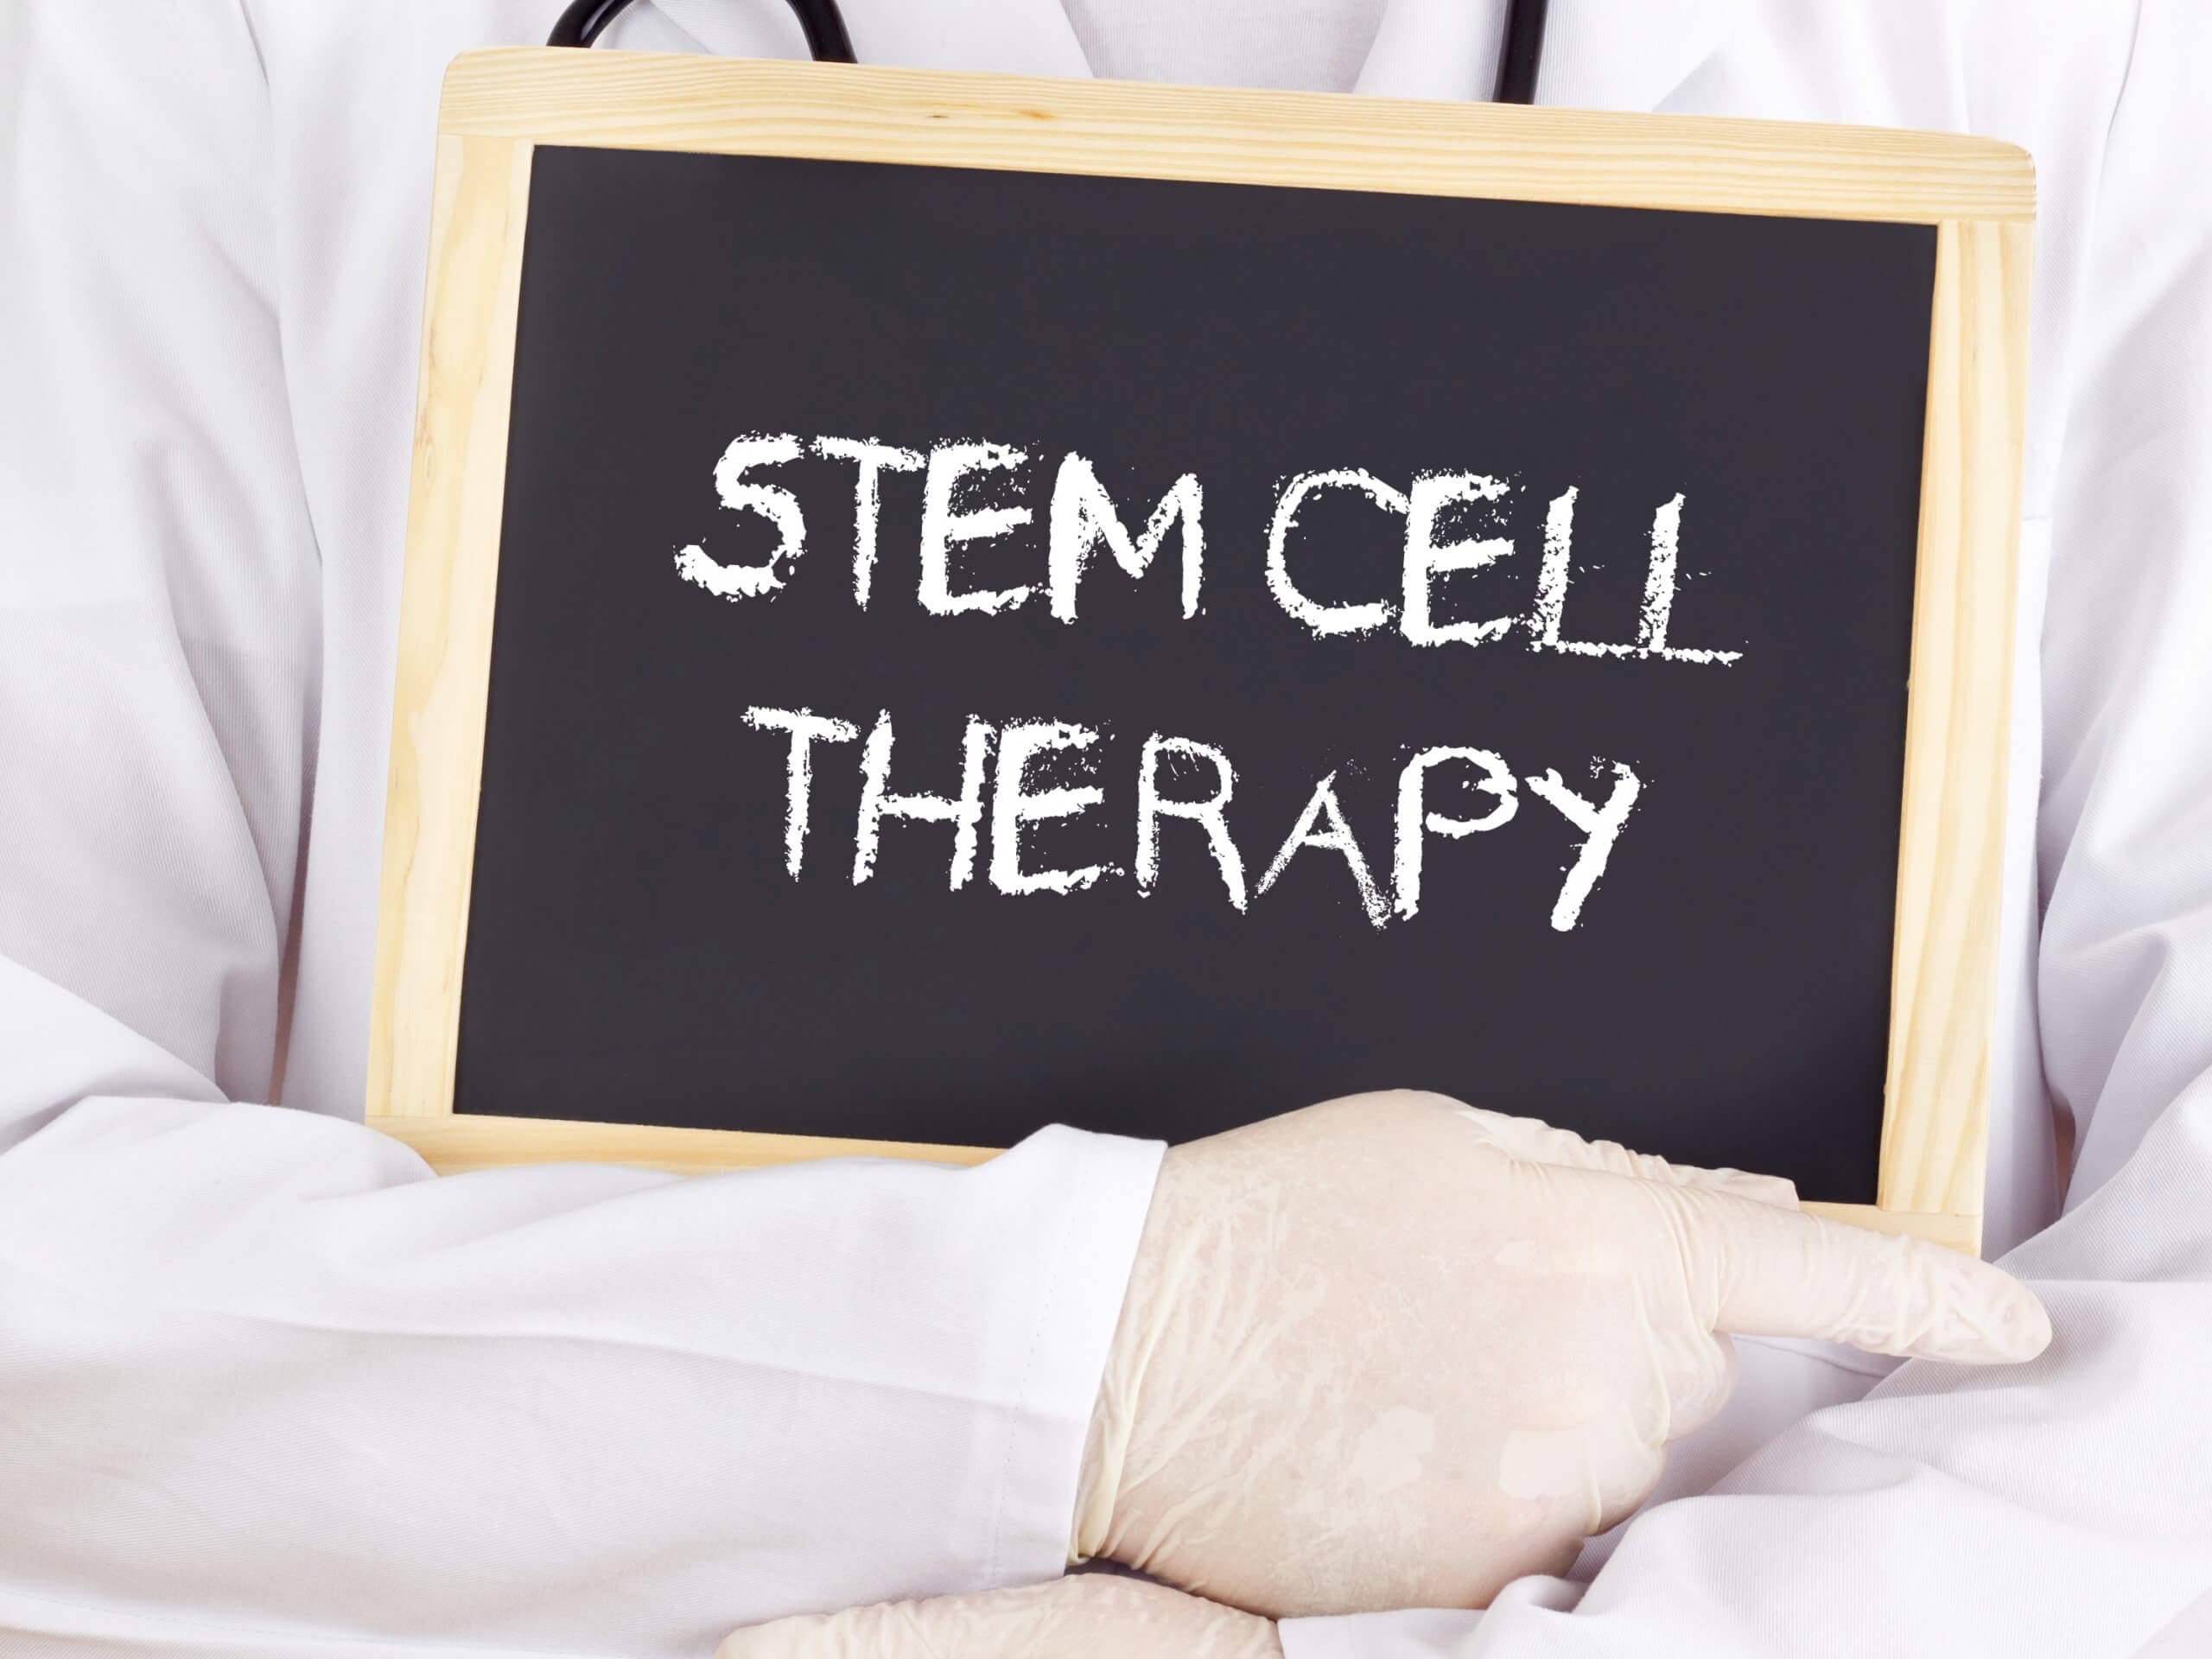 Stem cell therapies